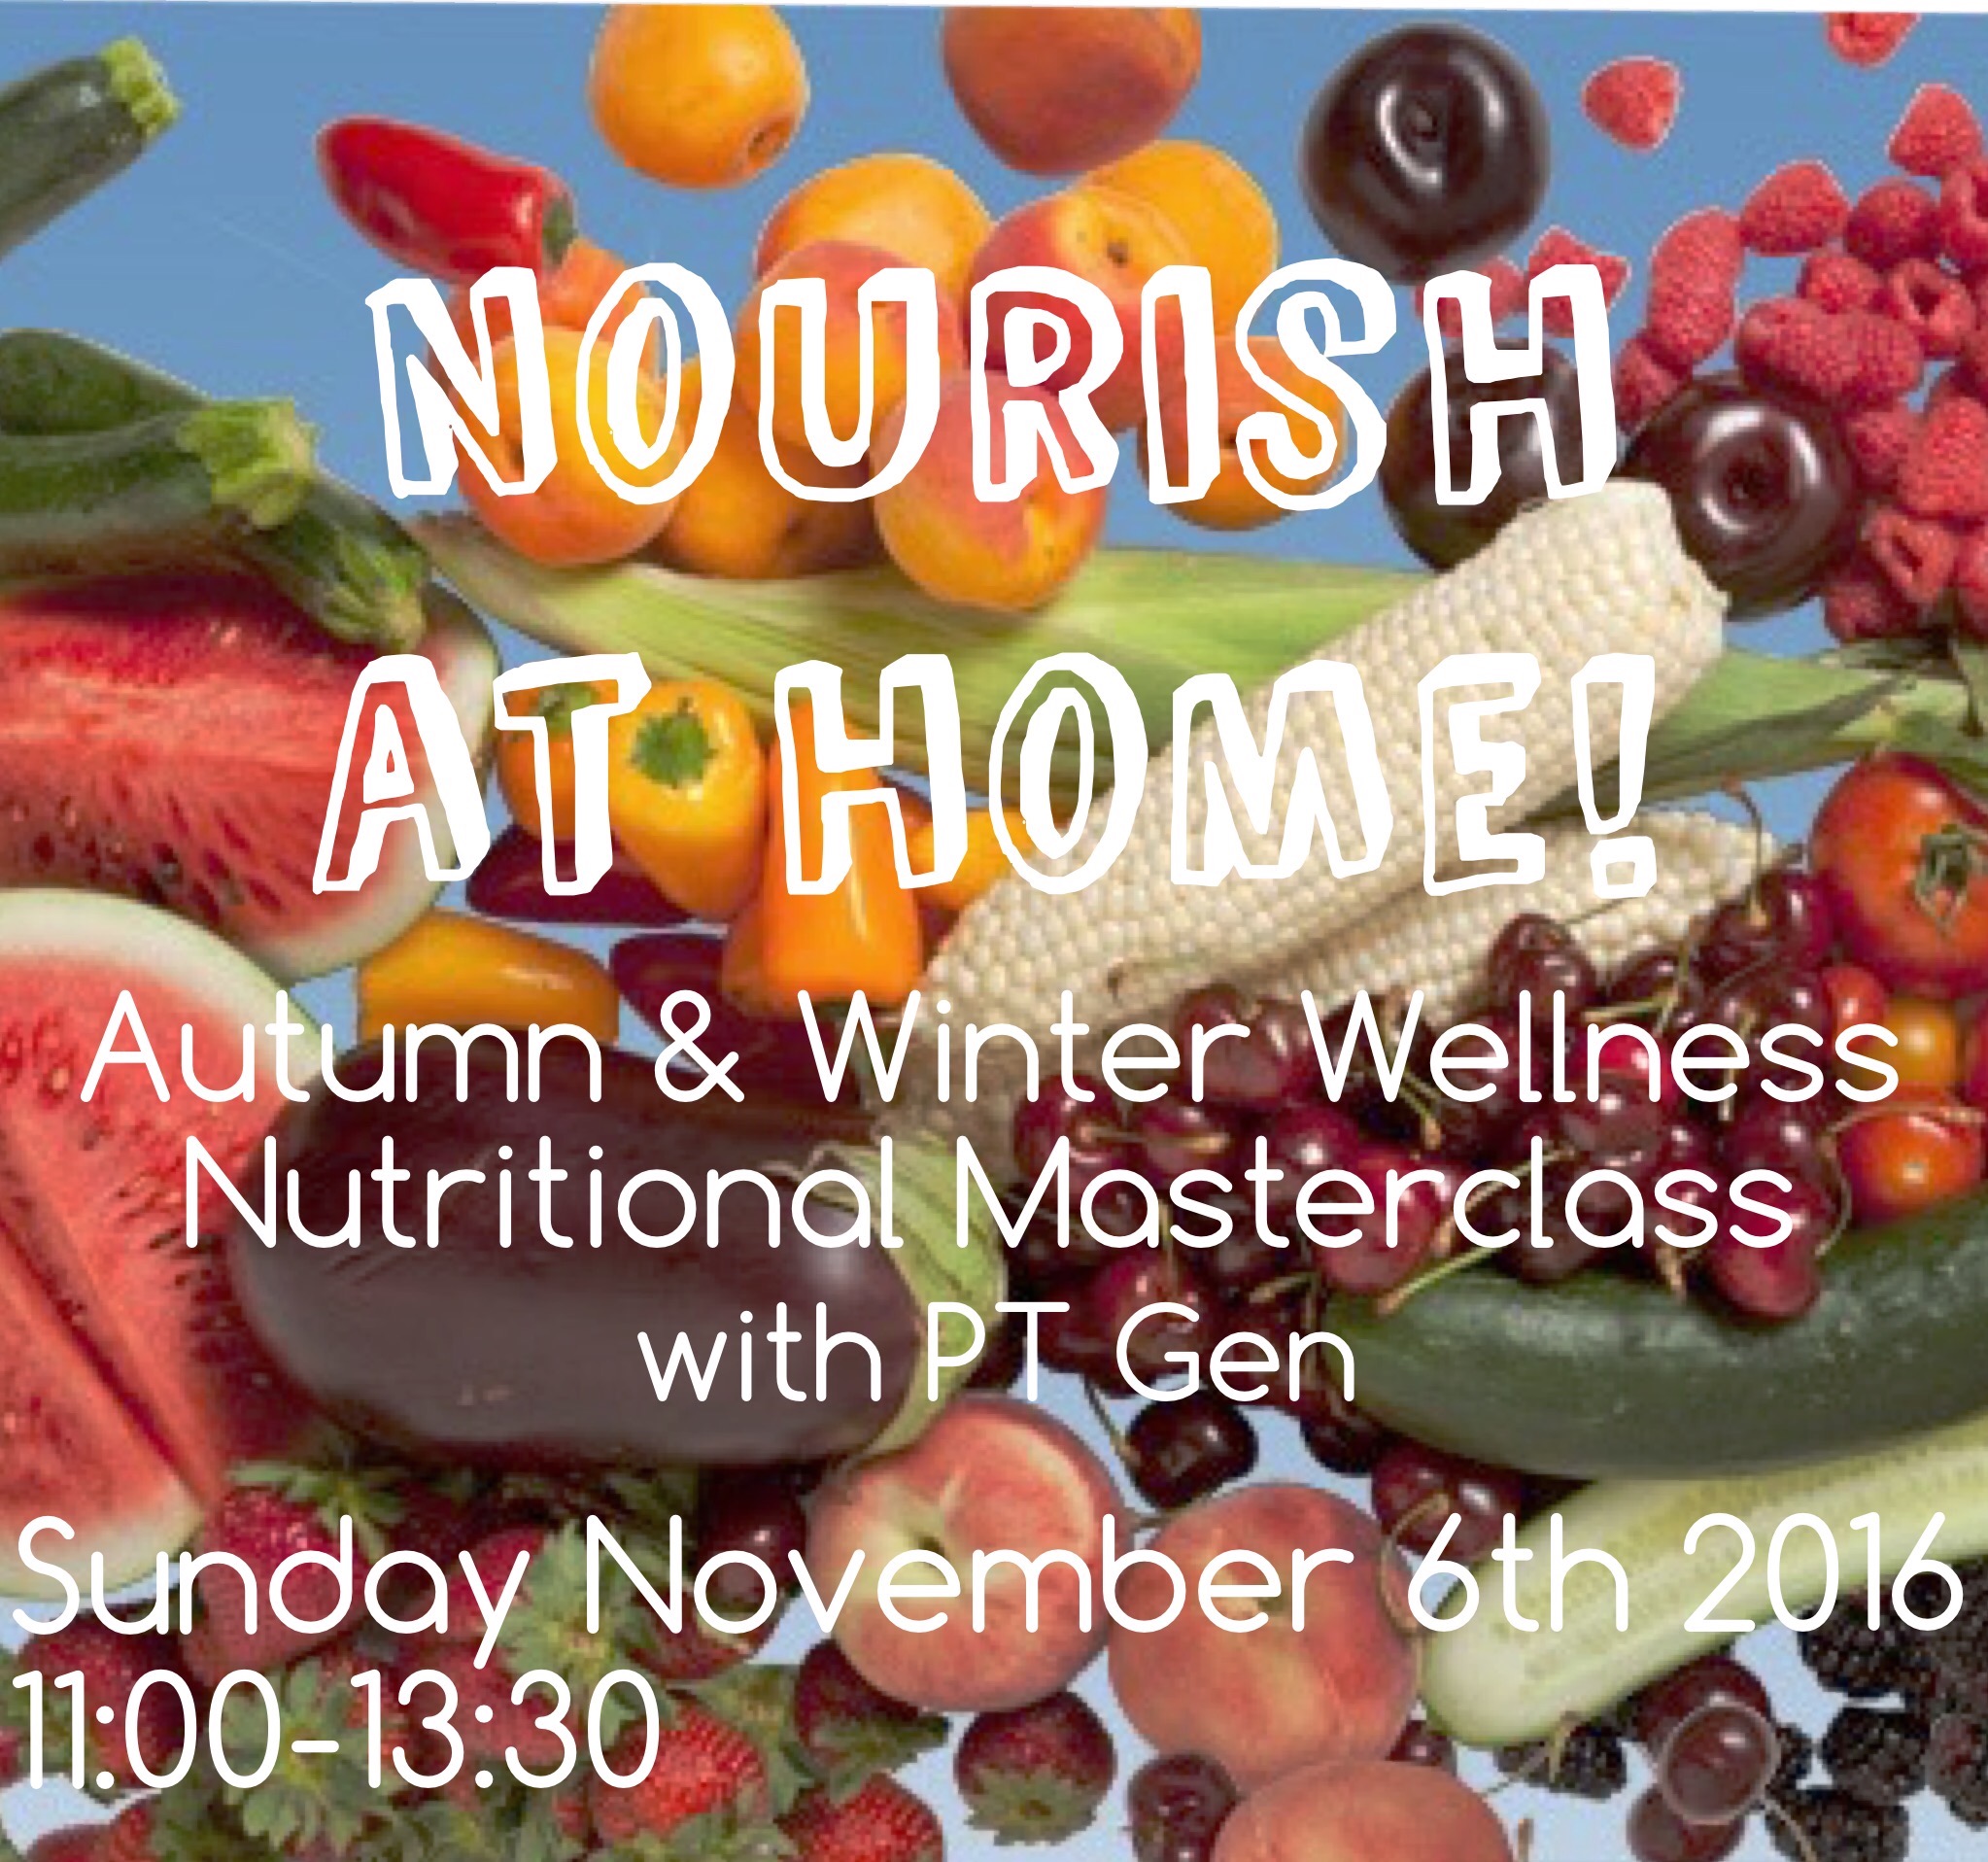 Get ready to Nourish like never before!